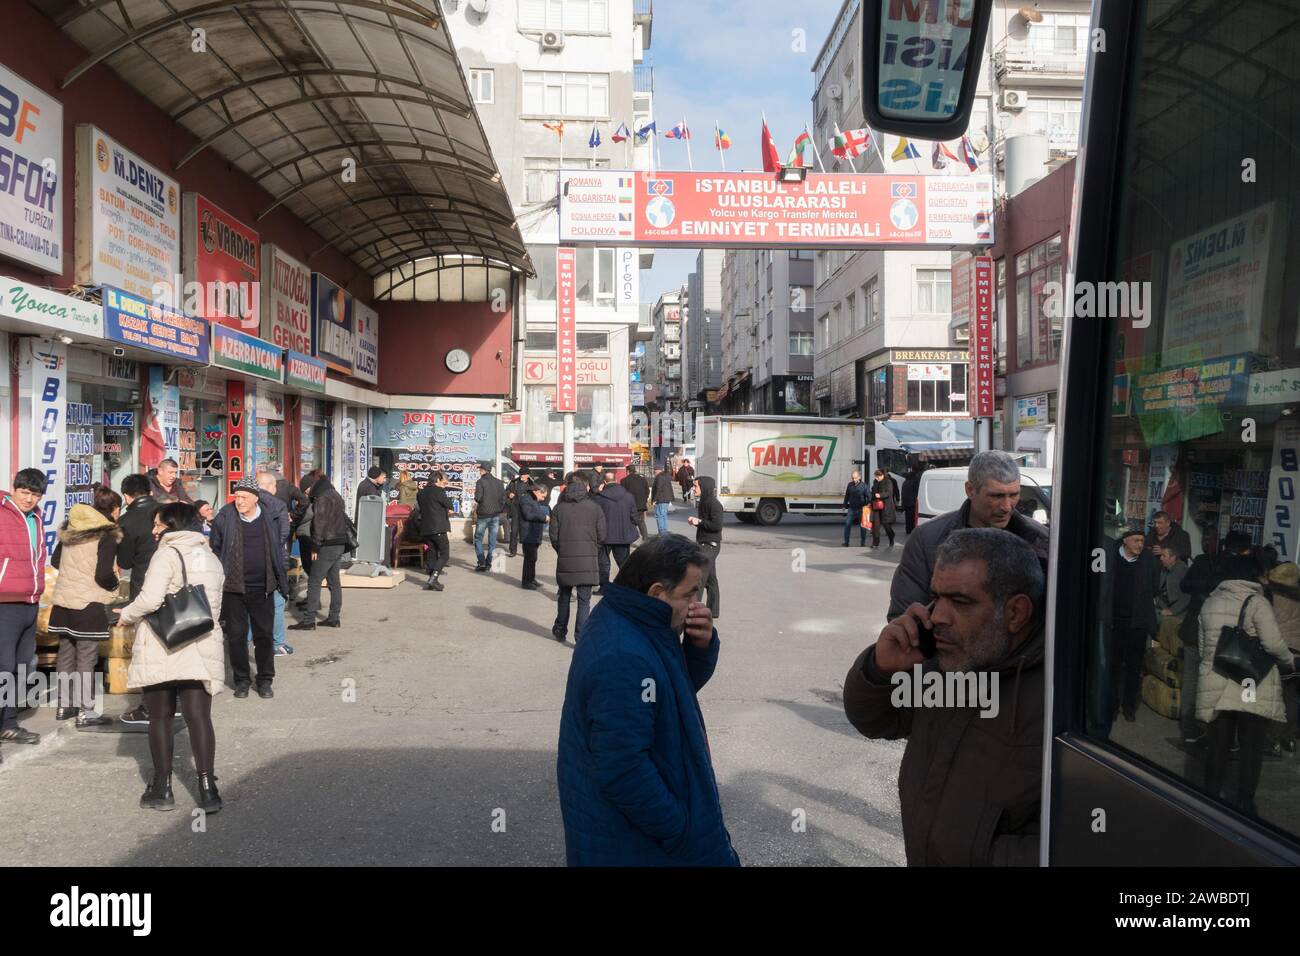 Istanbul, Turkey - Jan 17, 2020: Tourists traveling to the Balkans, Armenia, Georgia or Iran wait to board a coach and load their bags at the bus term Stock Photo